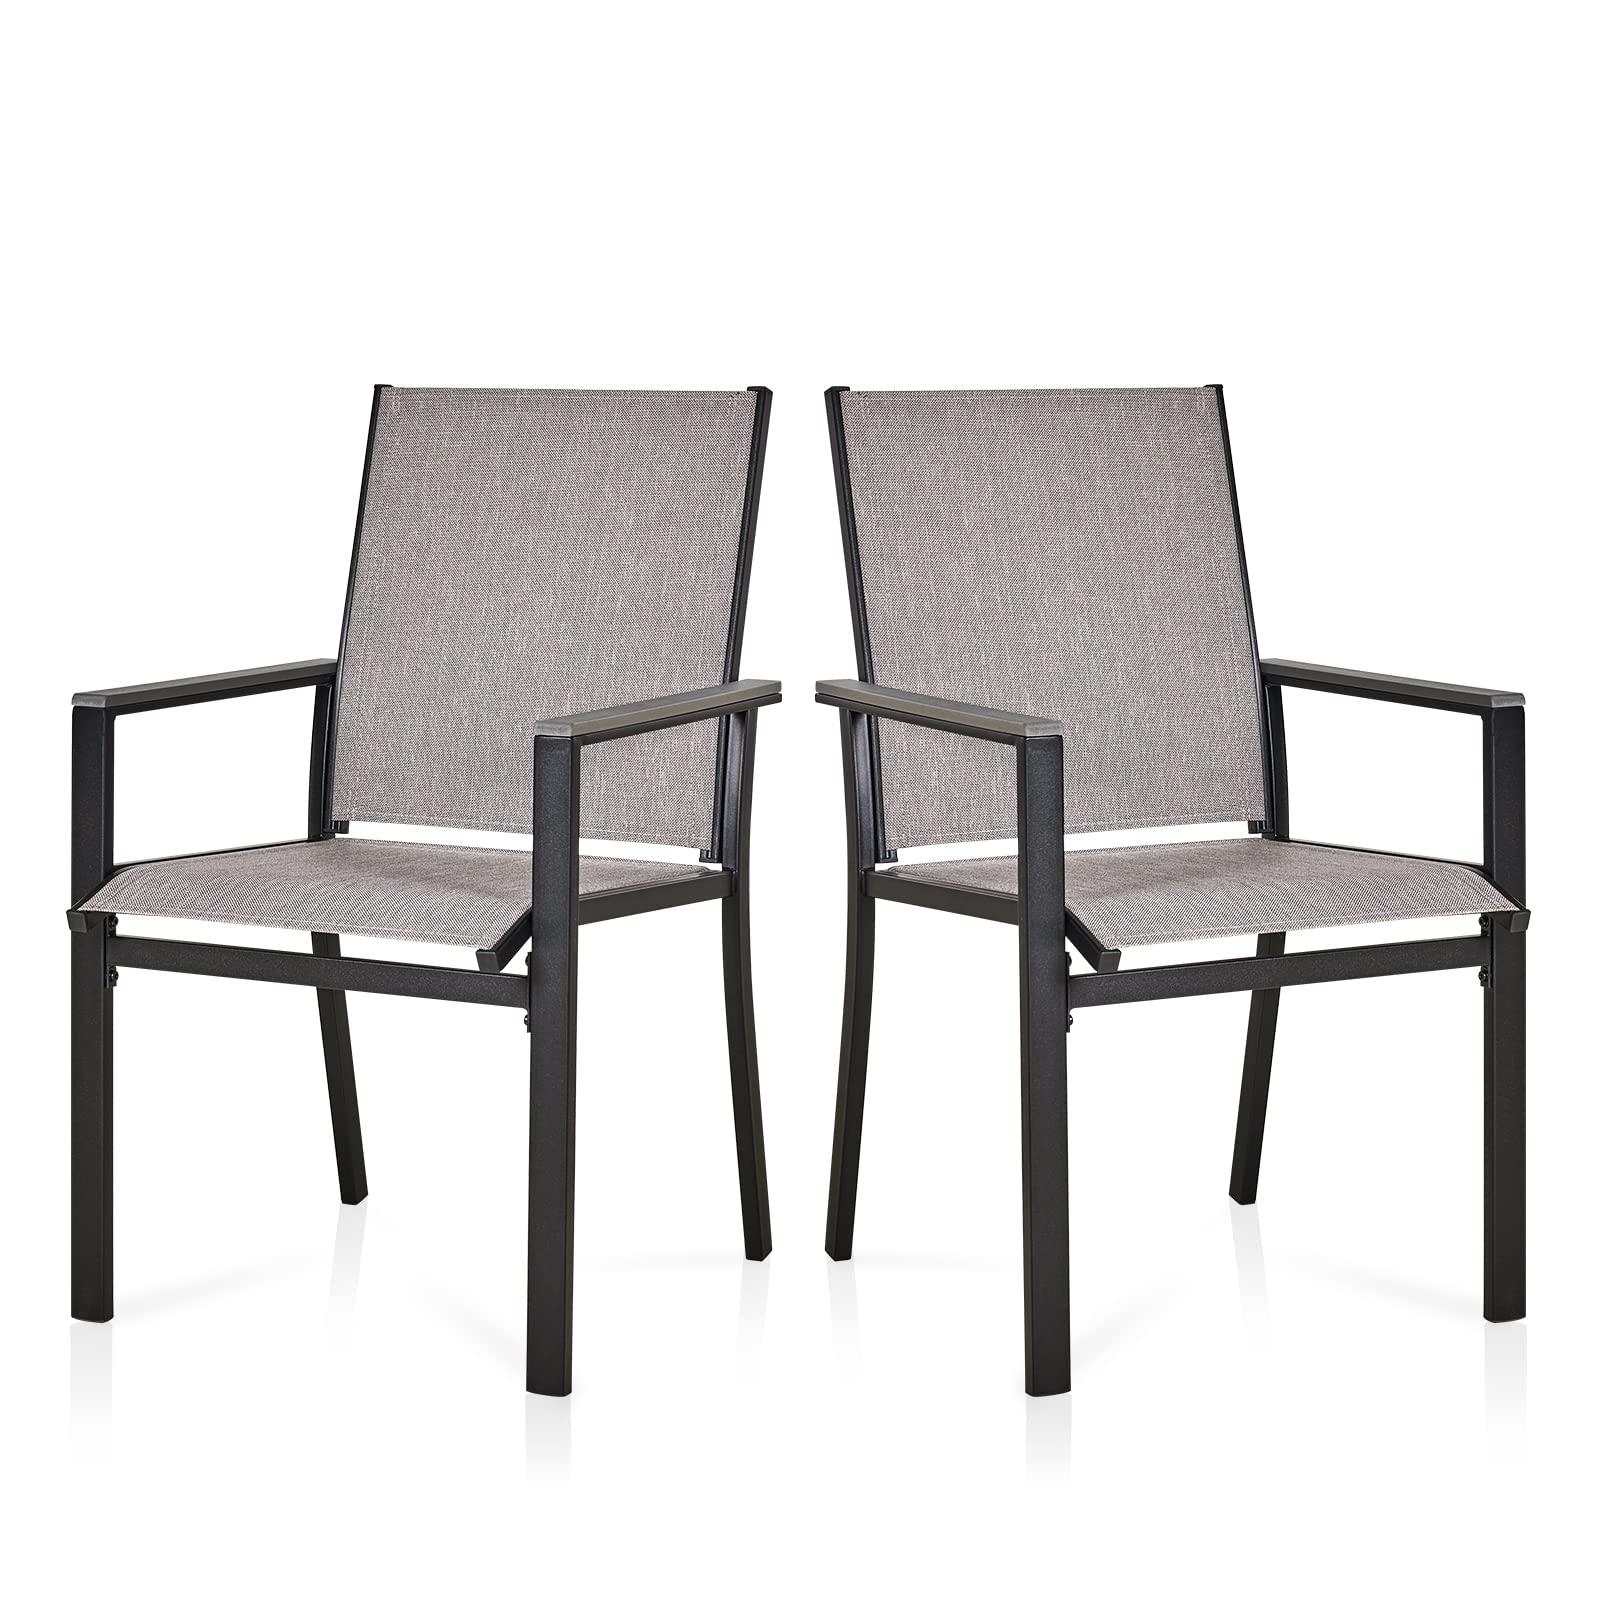 meooem patio chair set of 2, textilene patio furniture chair with armrest & black metal frame for lawn garden backyard.